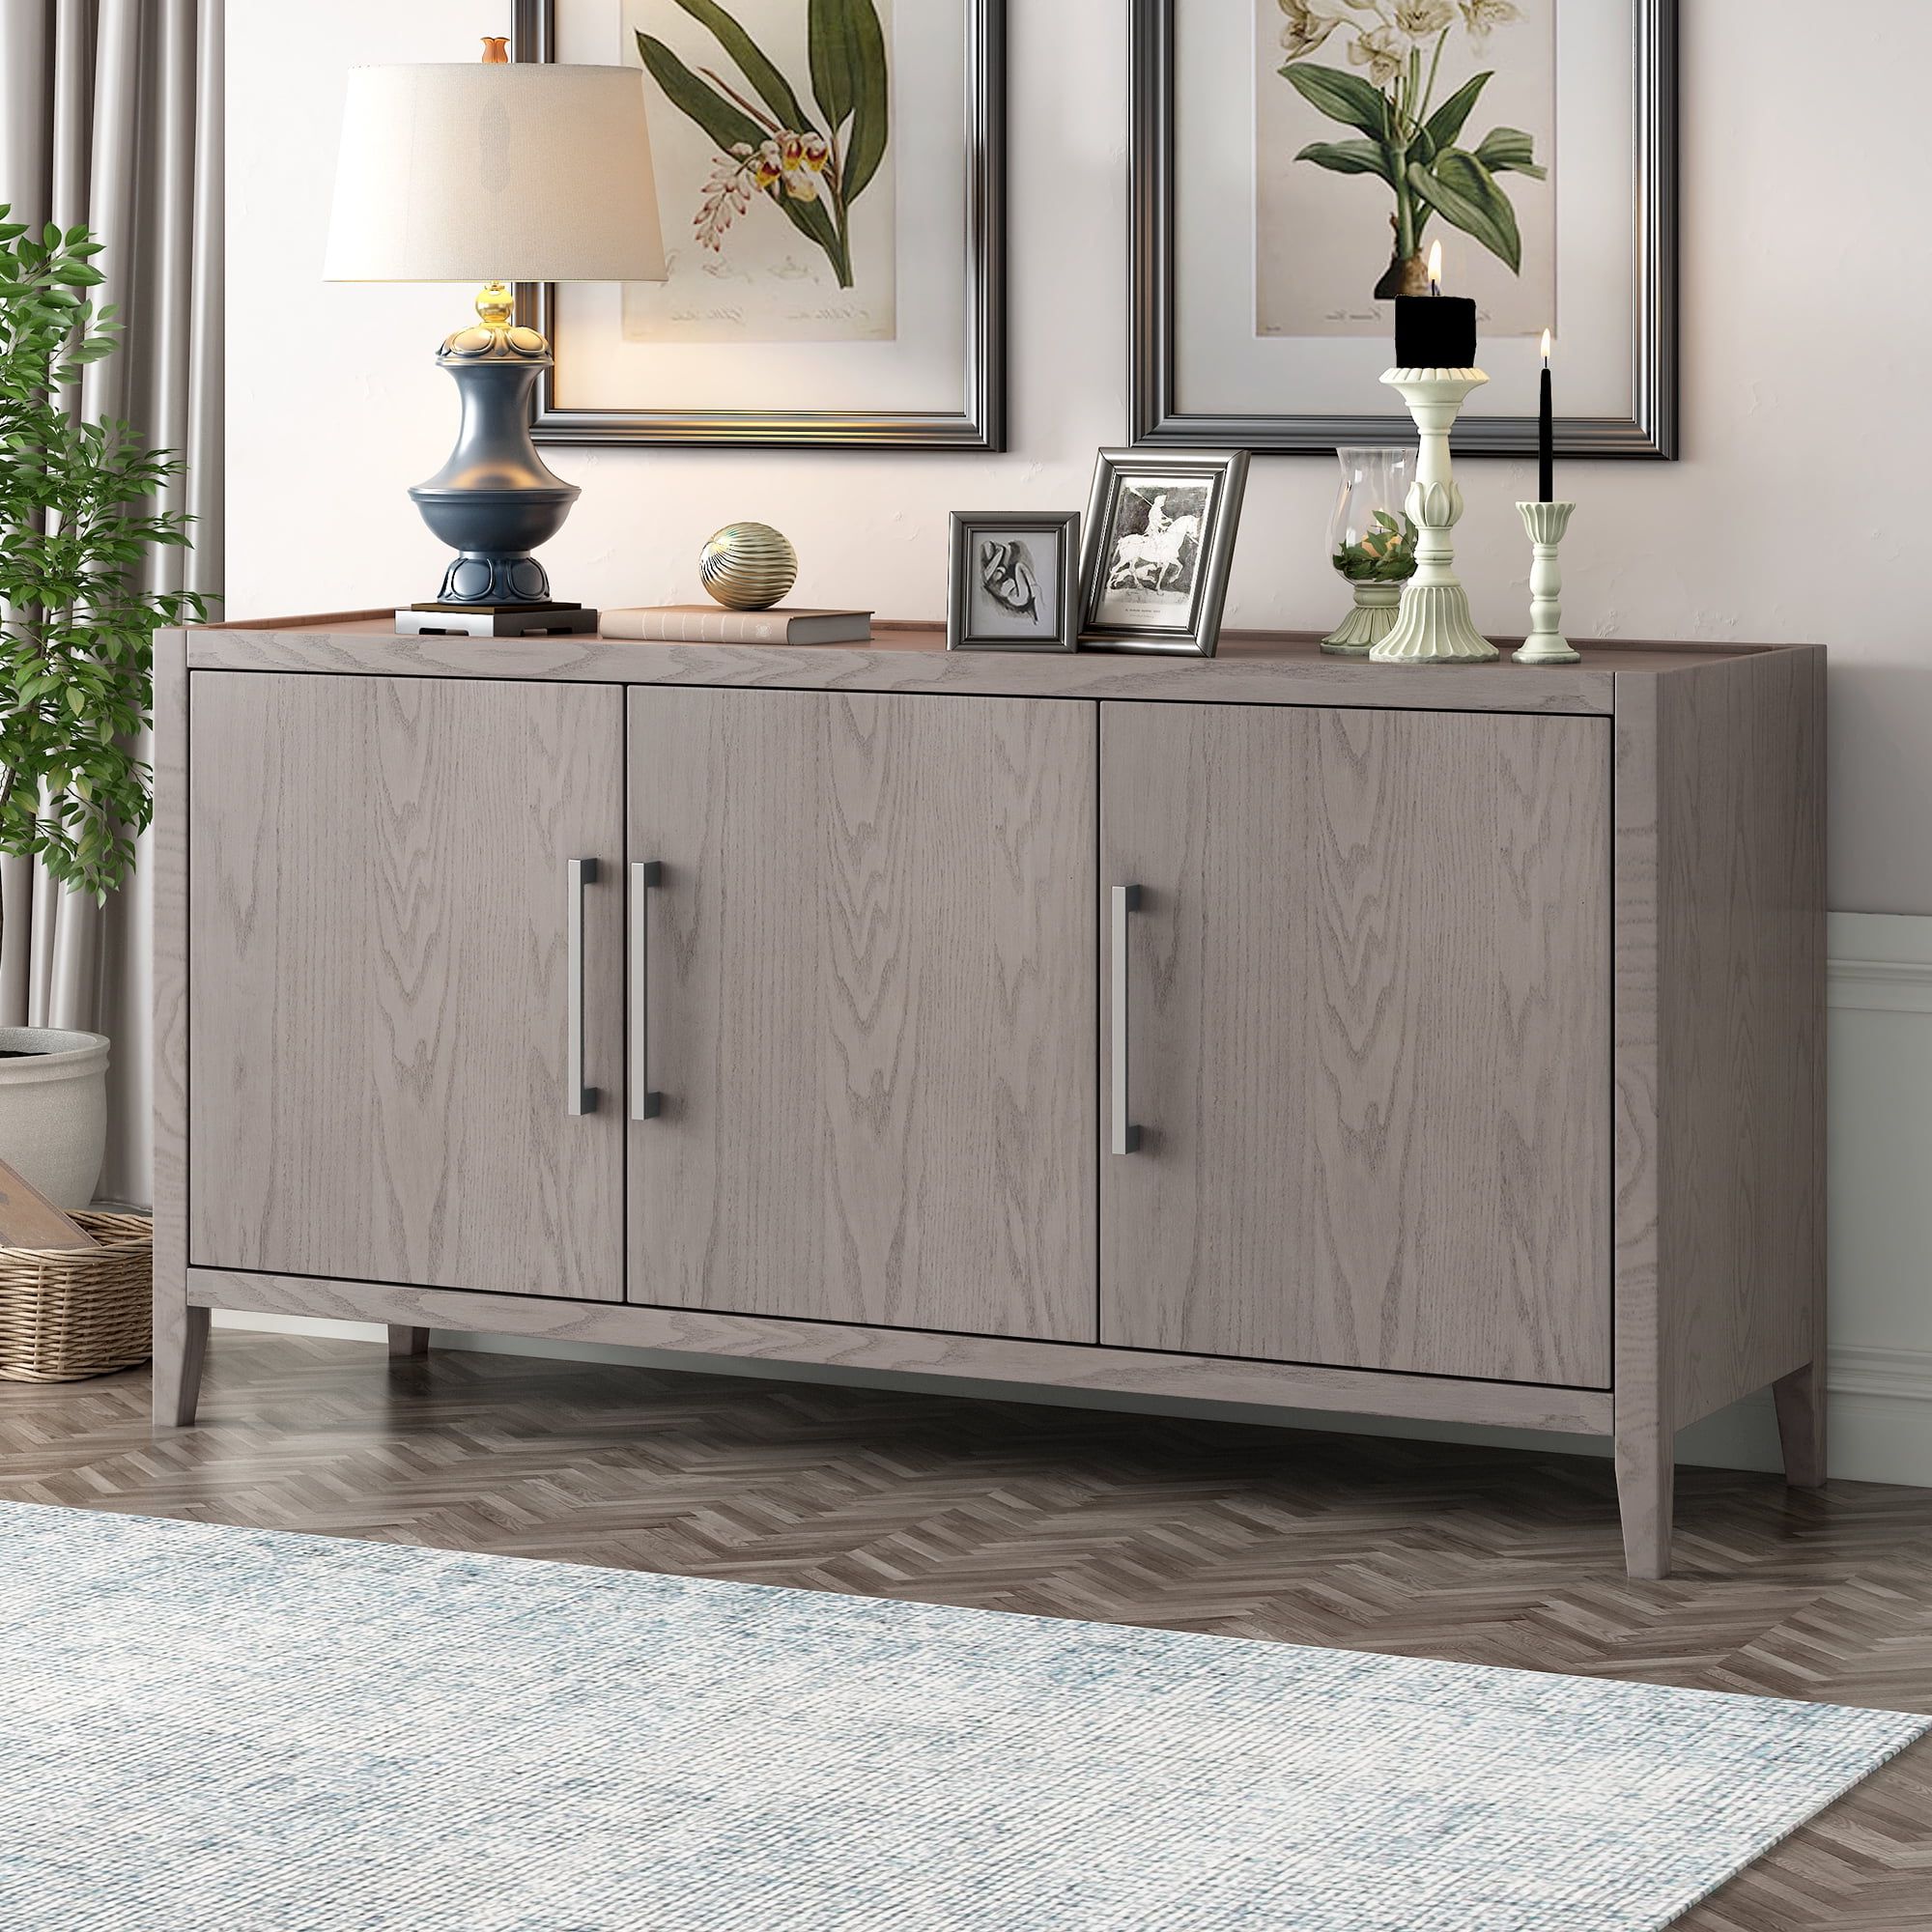 Beige Storage Cabinet, Sideboard Cabinet Furniture, Accent Storage Cabinet  With 3 Doors And Adjustable Shelves, Retro Wood Buffet Sideboard, Kamida Storage  Cabinet For Kitchen Dining Room Living Room – Walmart Inside 3 Door Accent Cabinet Sideboards (Gallery 4 of 20)